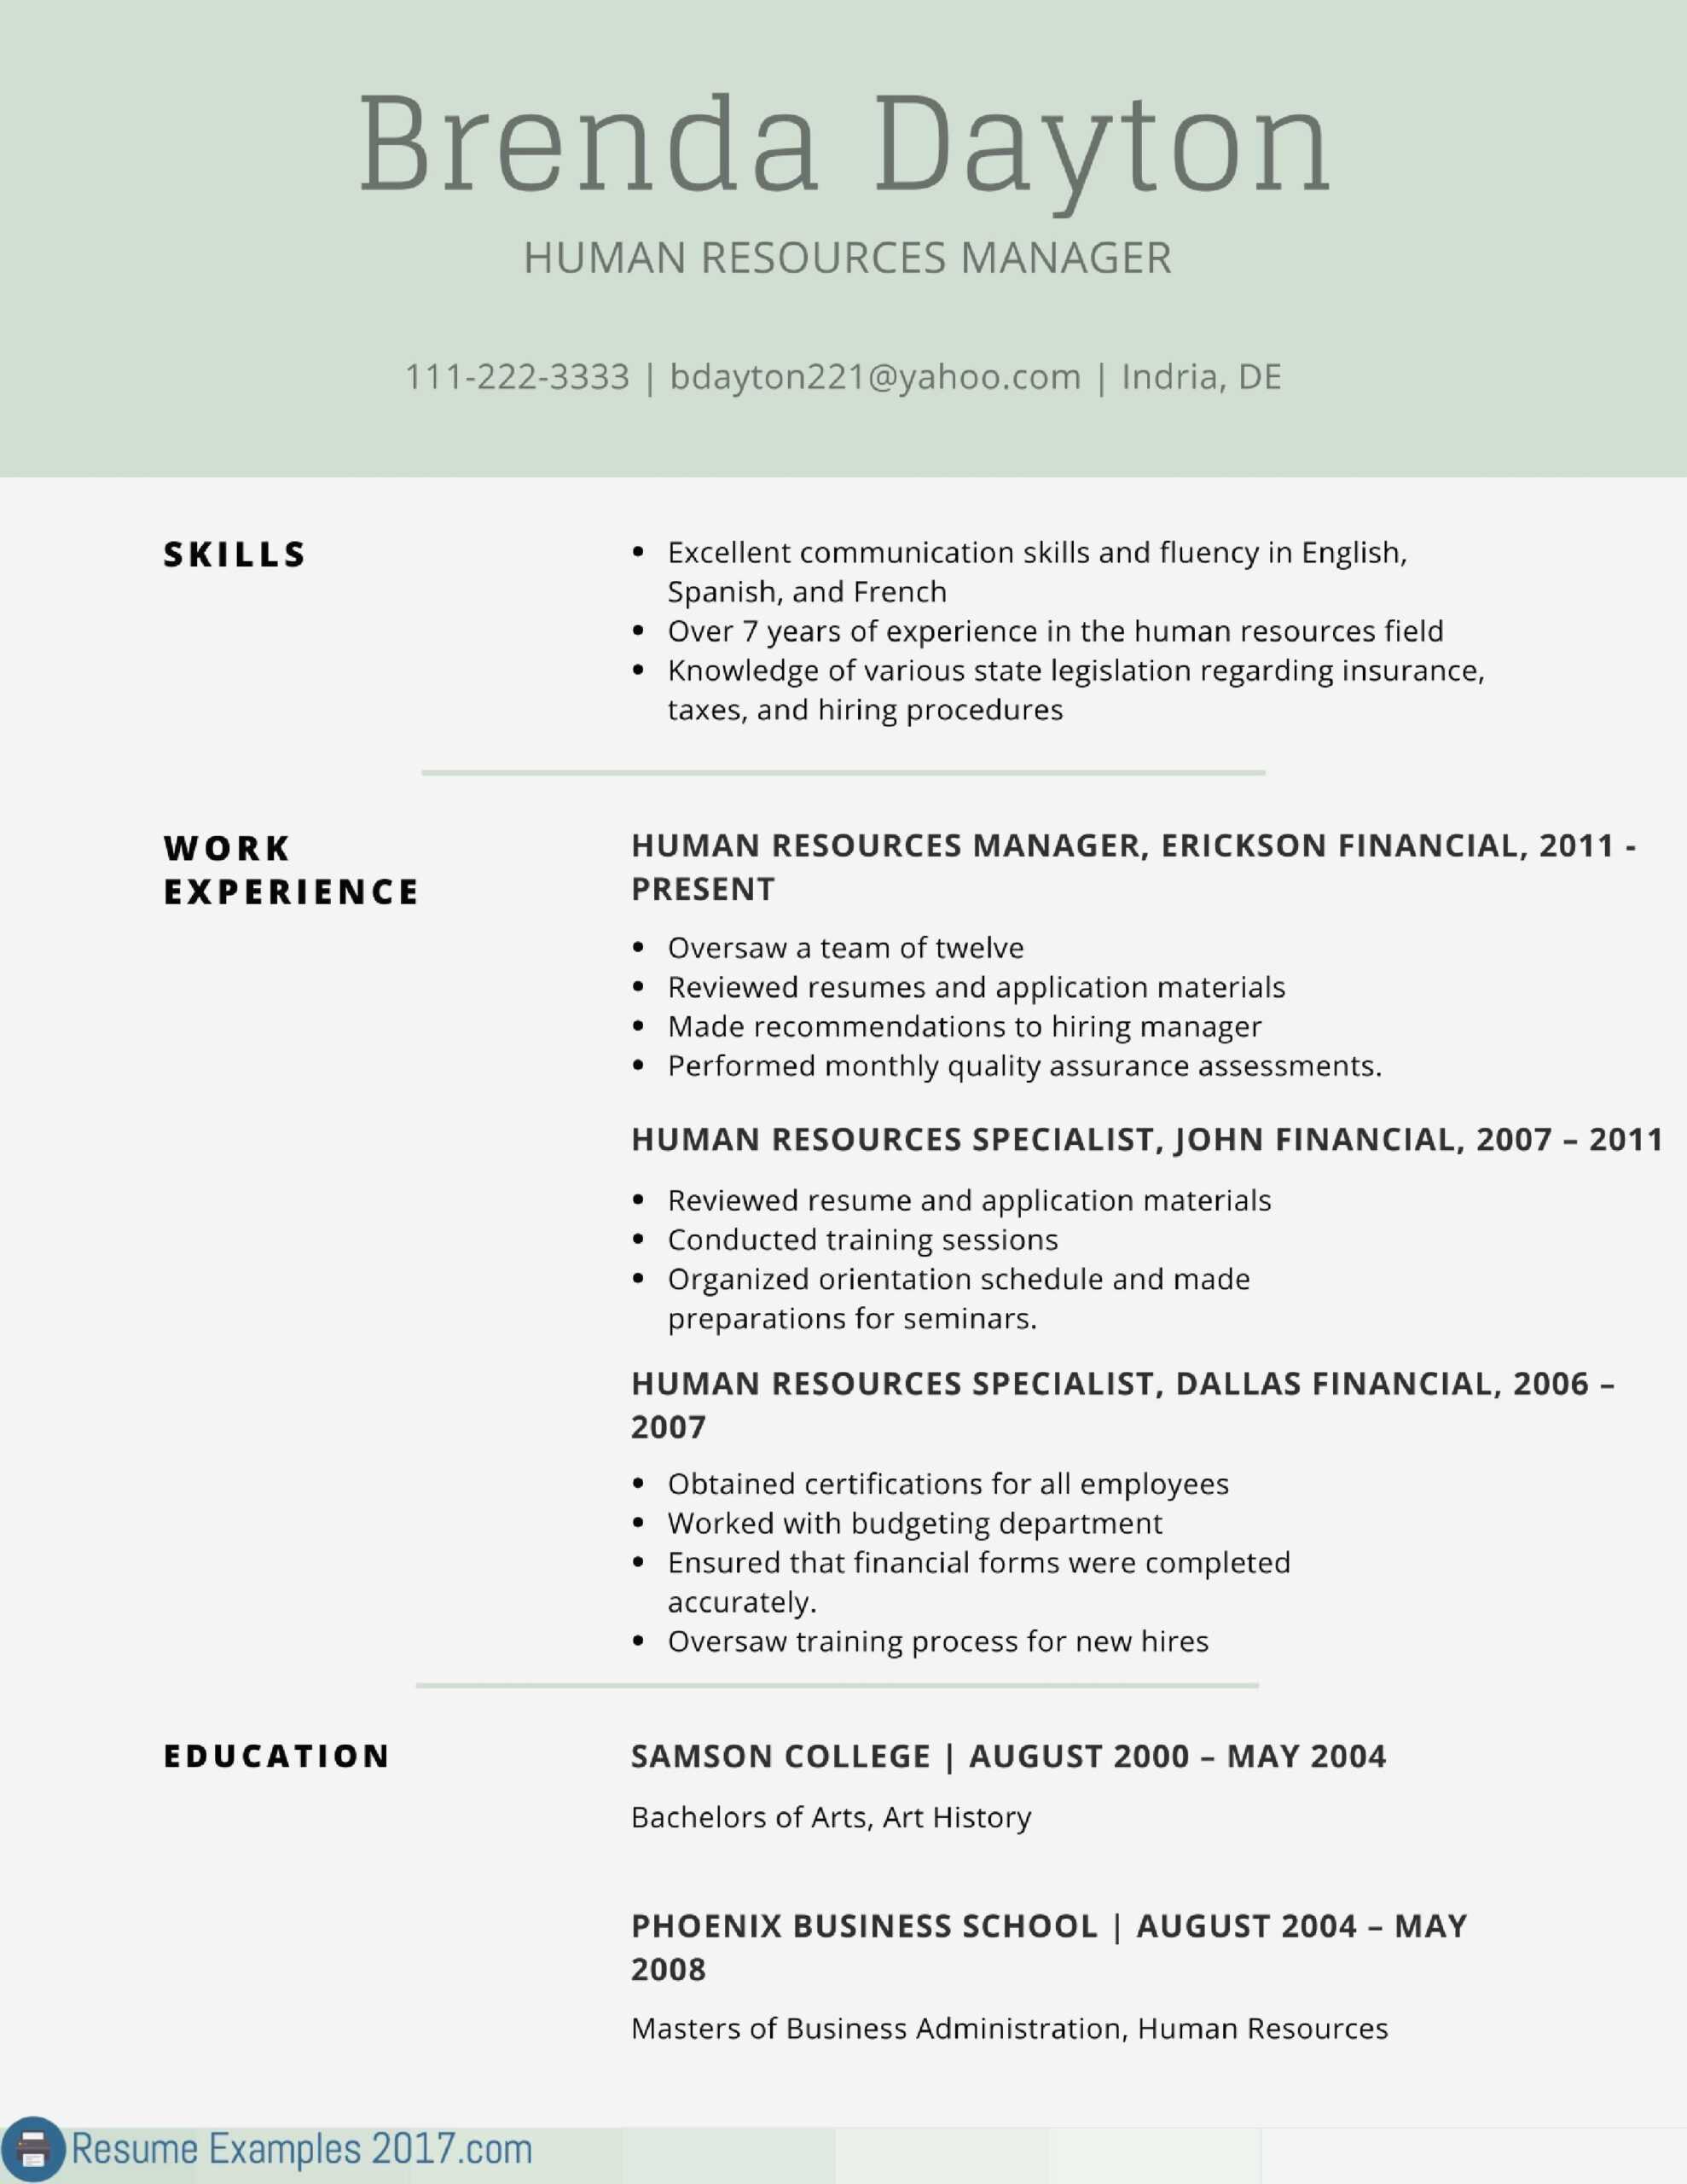 11 Rutgers Resume Template Ideas | Resume Ideas Throughout Rutgers Powerpoint Template